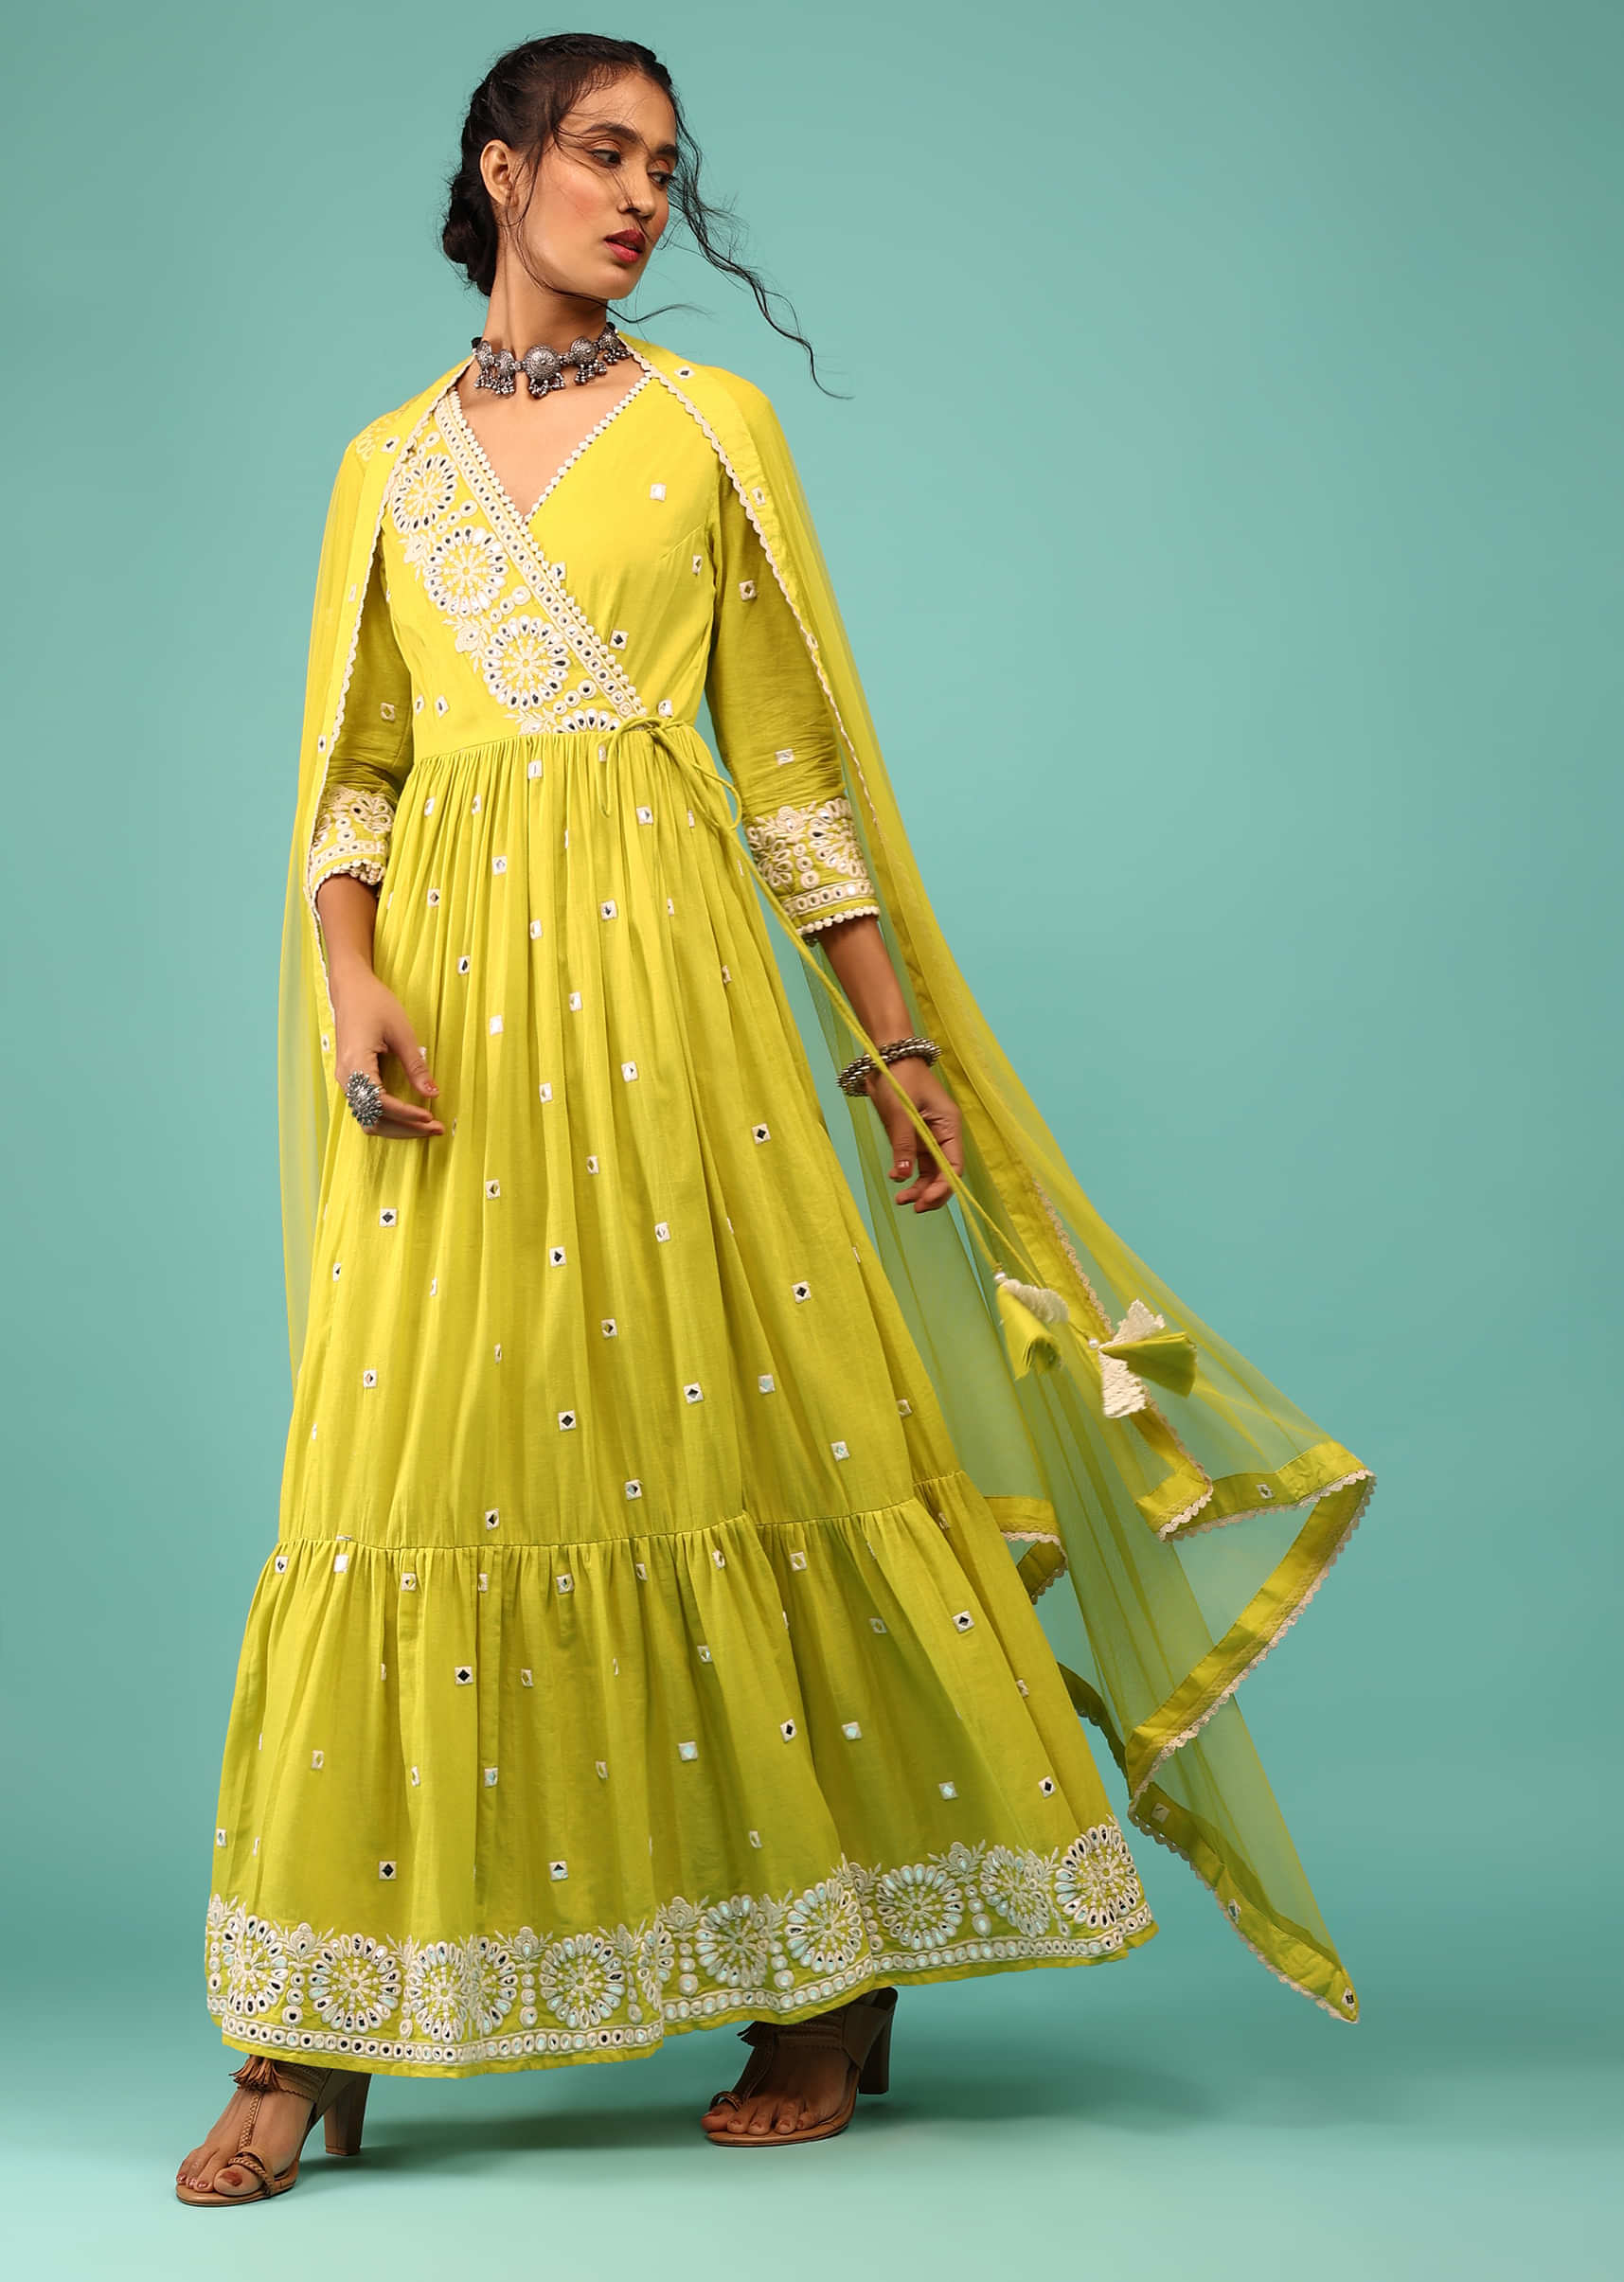 Lime Yellow Anarkali Kurta In Lucknowi Floral Embroidery With Angrakha Pattern & Surplice Neckline